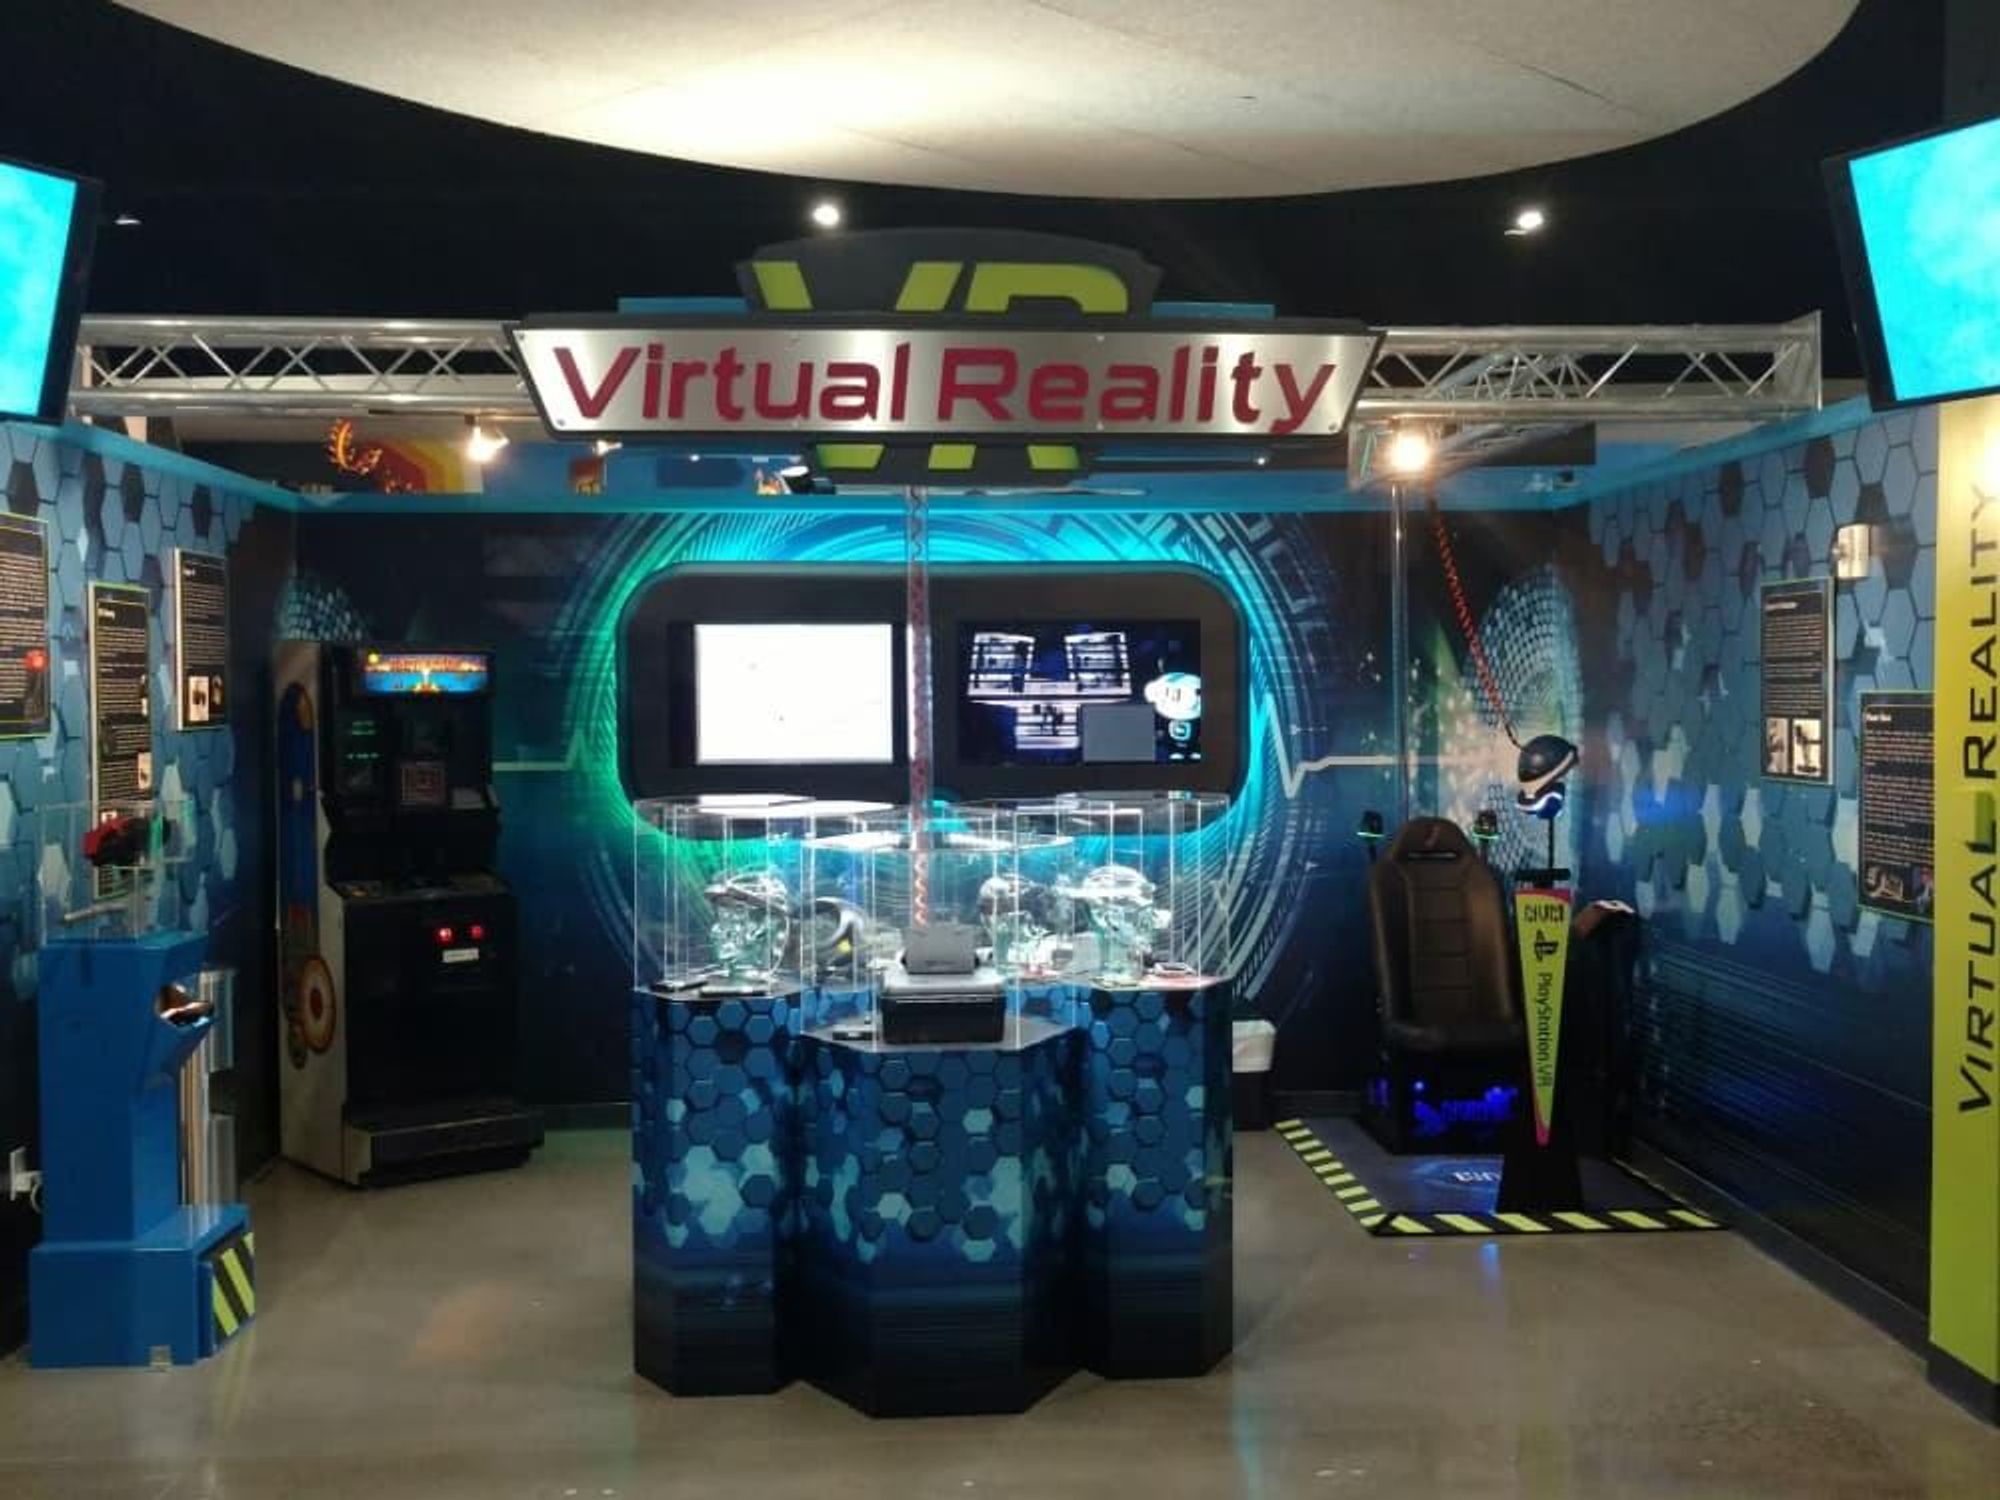 Virtual Reality exhibit, National videogame museum